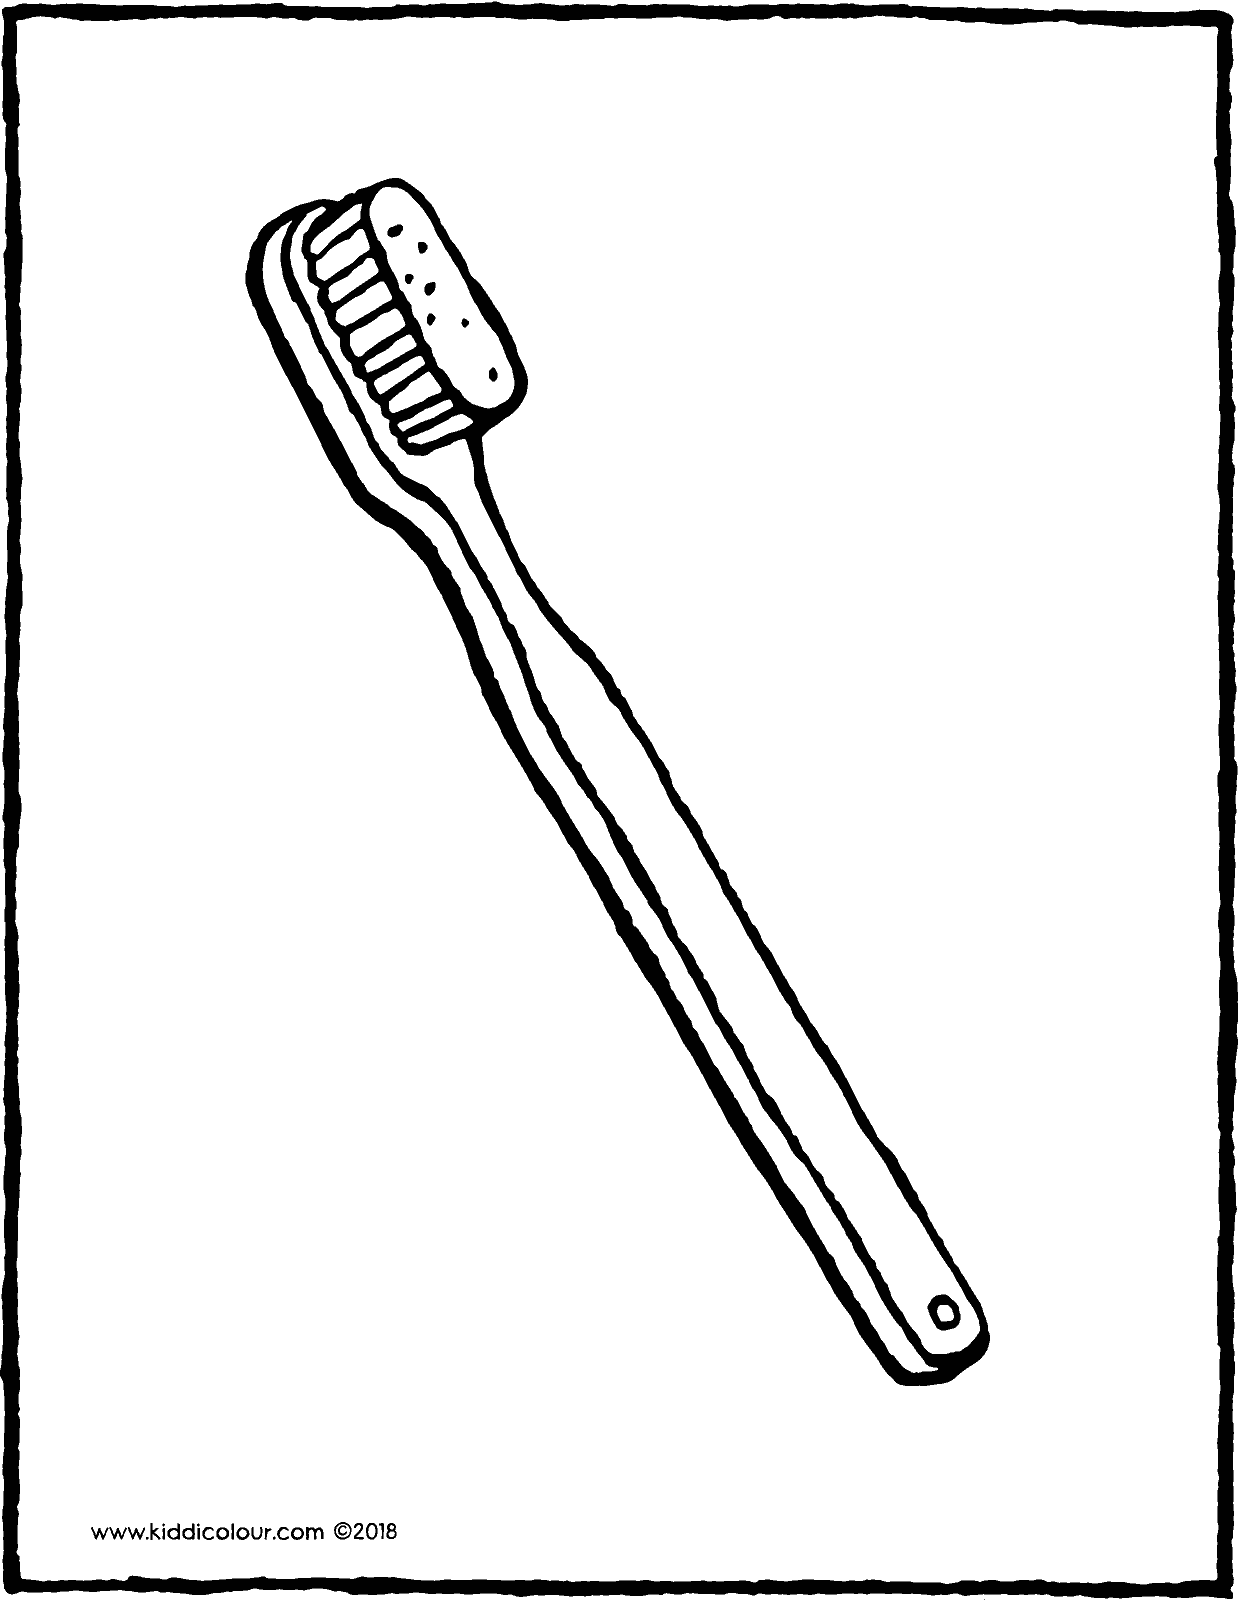 toothbrush coloring page toothbrush coloring pages coloring pages to download and page toothbrush coloring 